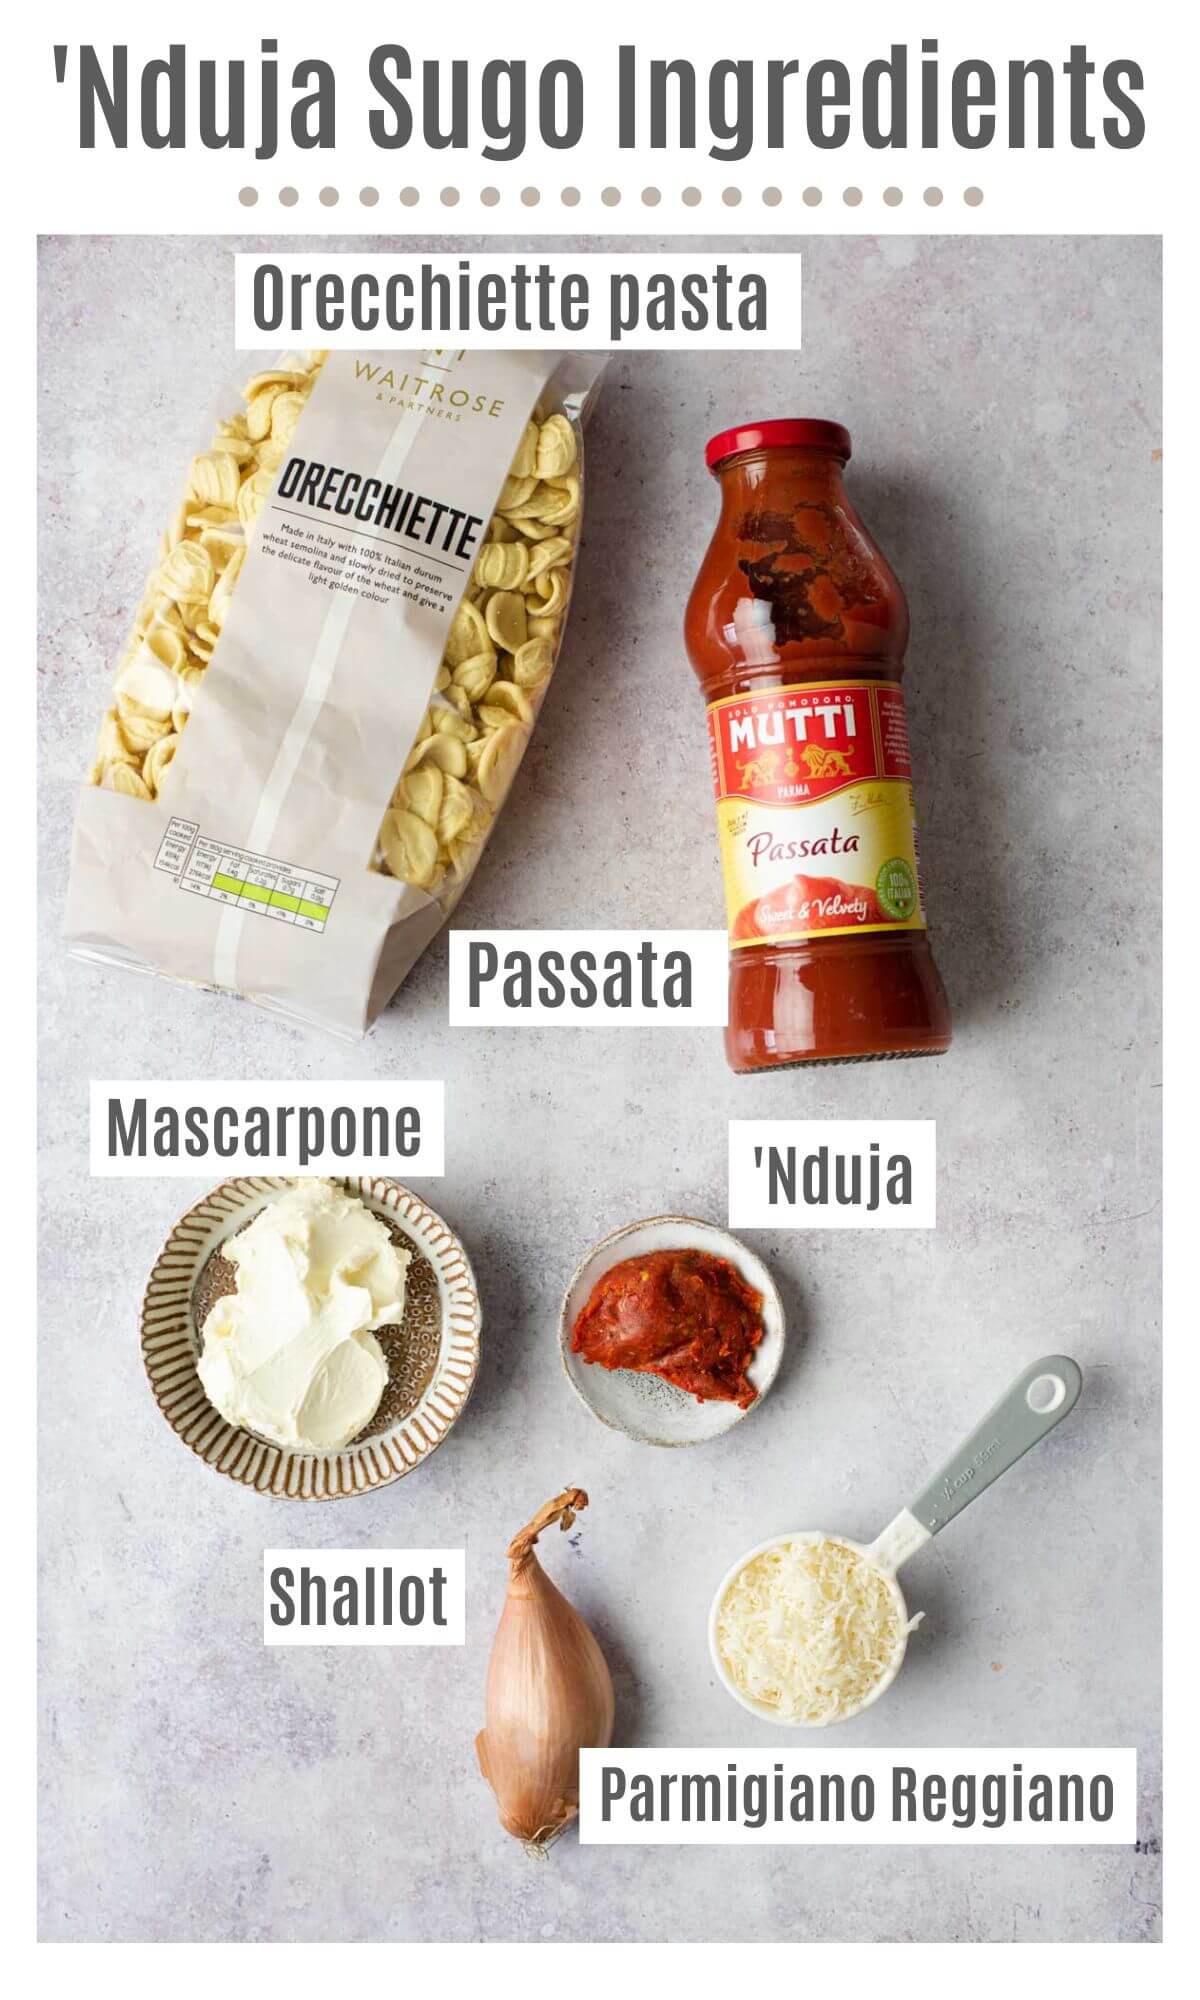 An overhead shot of all the ingredients you need to make orecchiette with Nduja sugo